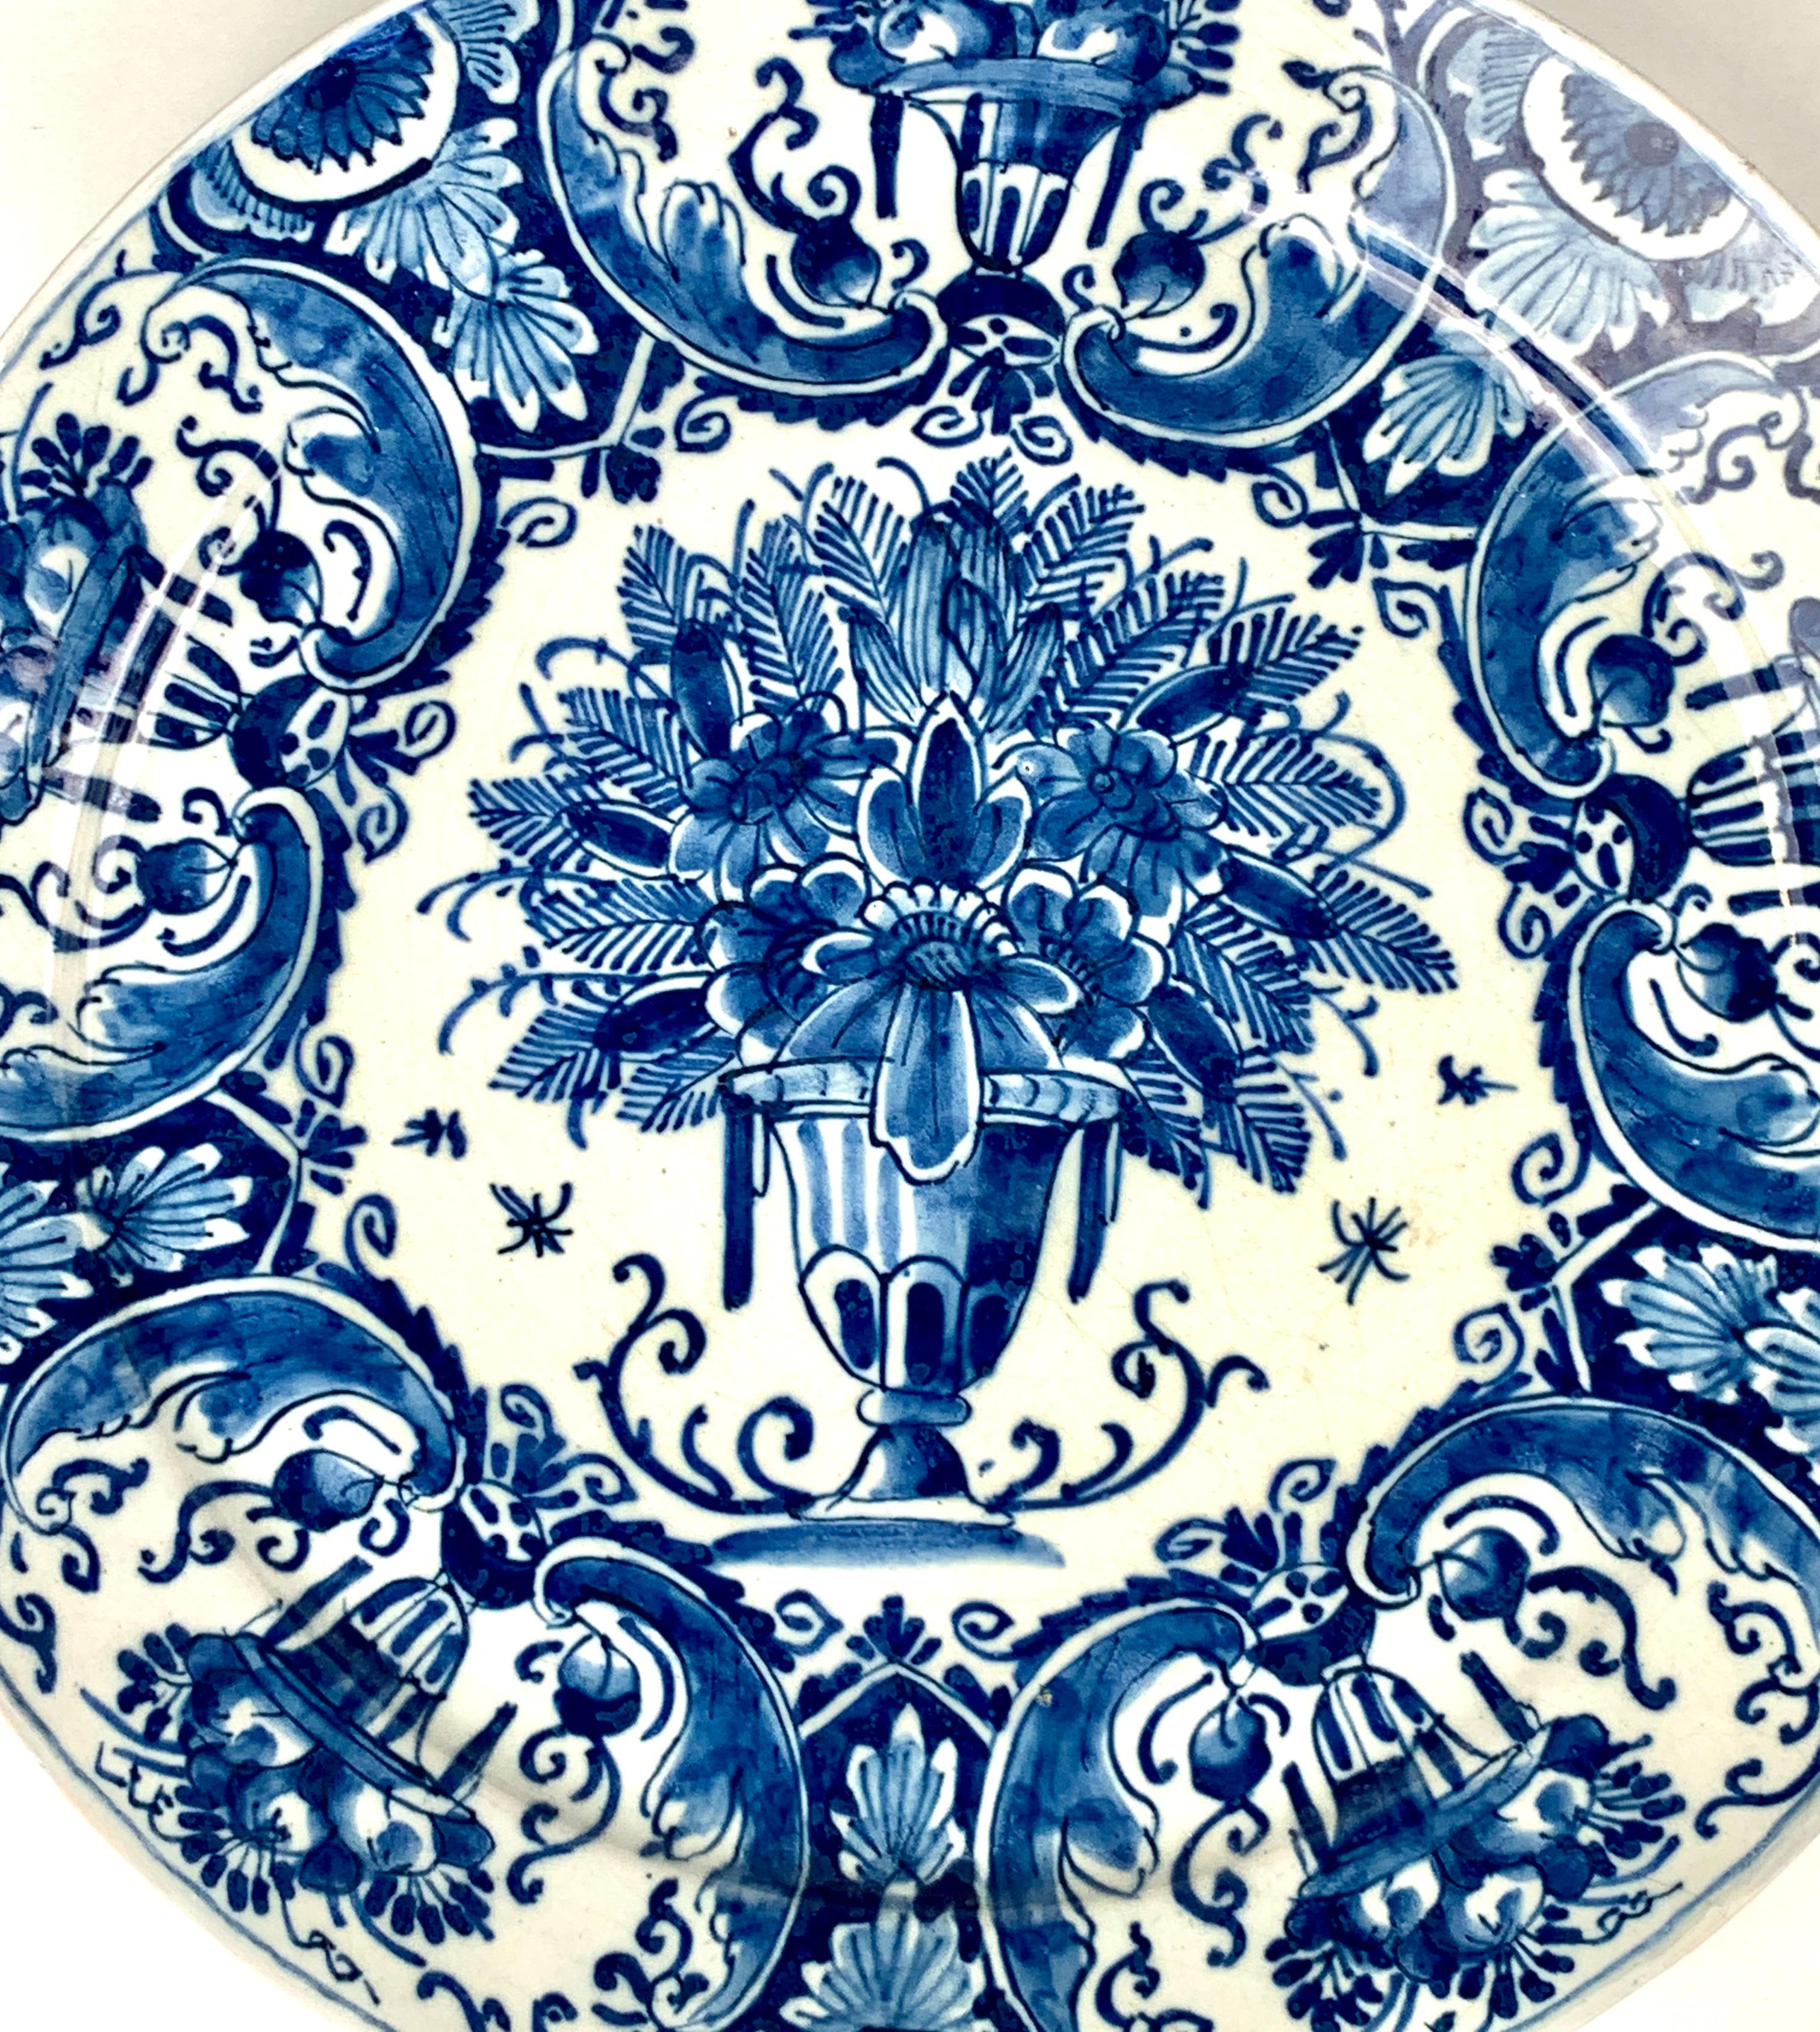 Hand-Painted 4 Large Blue and White Dutch Delft Plates Hand Painted, 18th Century, Circa 1770